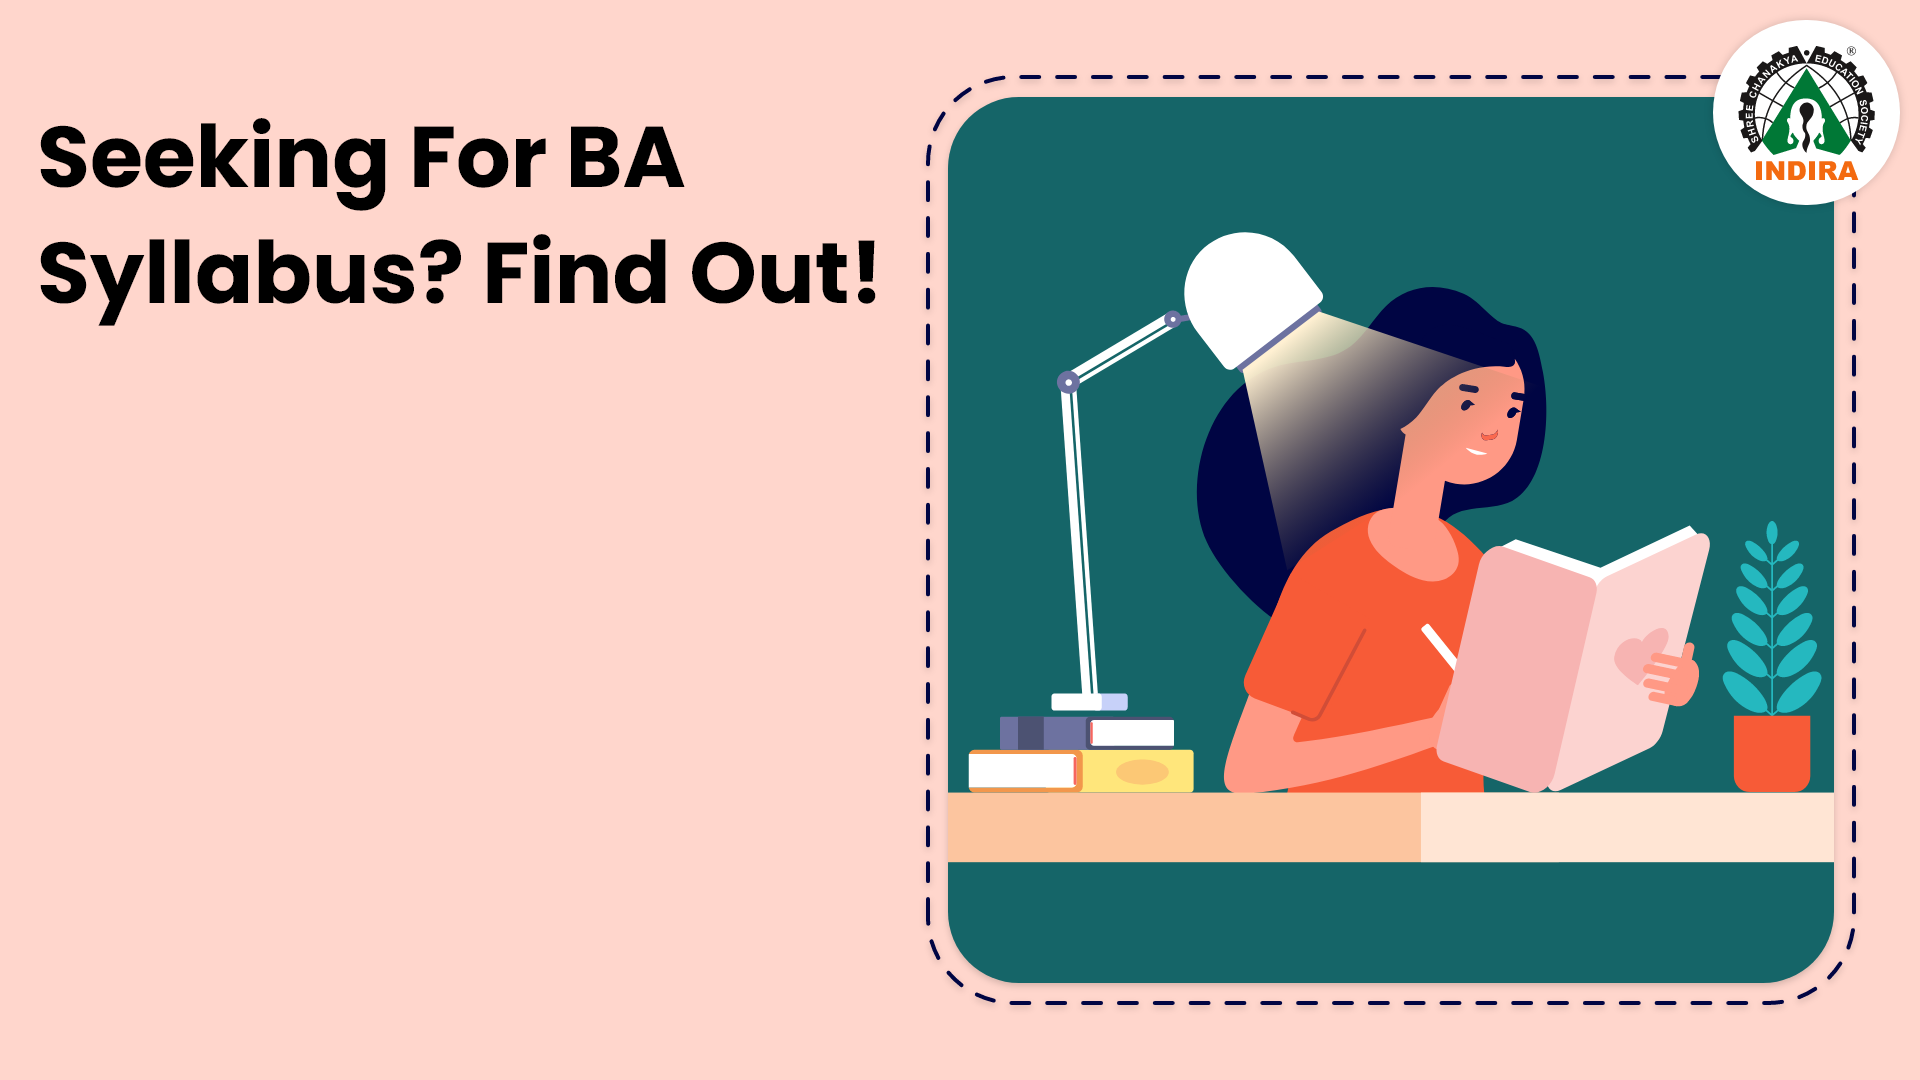 Seeking For BA Syllabus? Find Out!